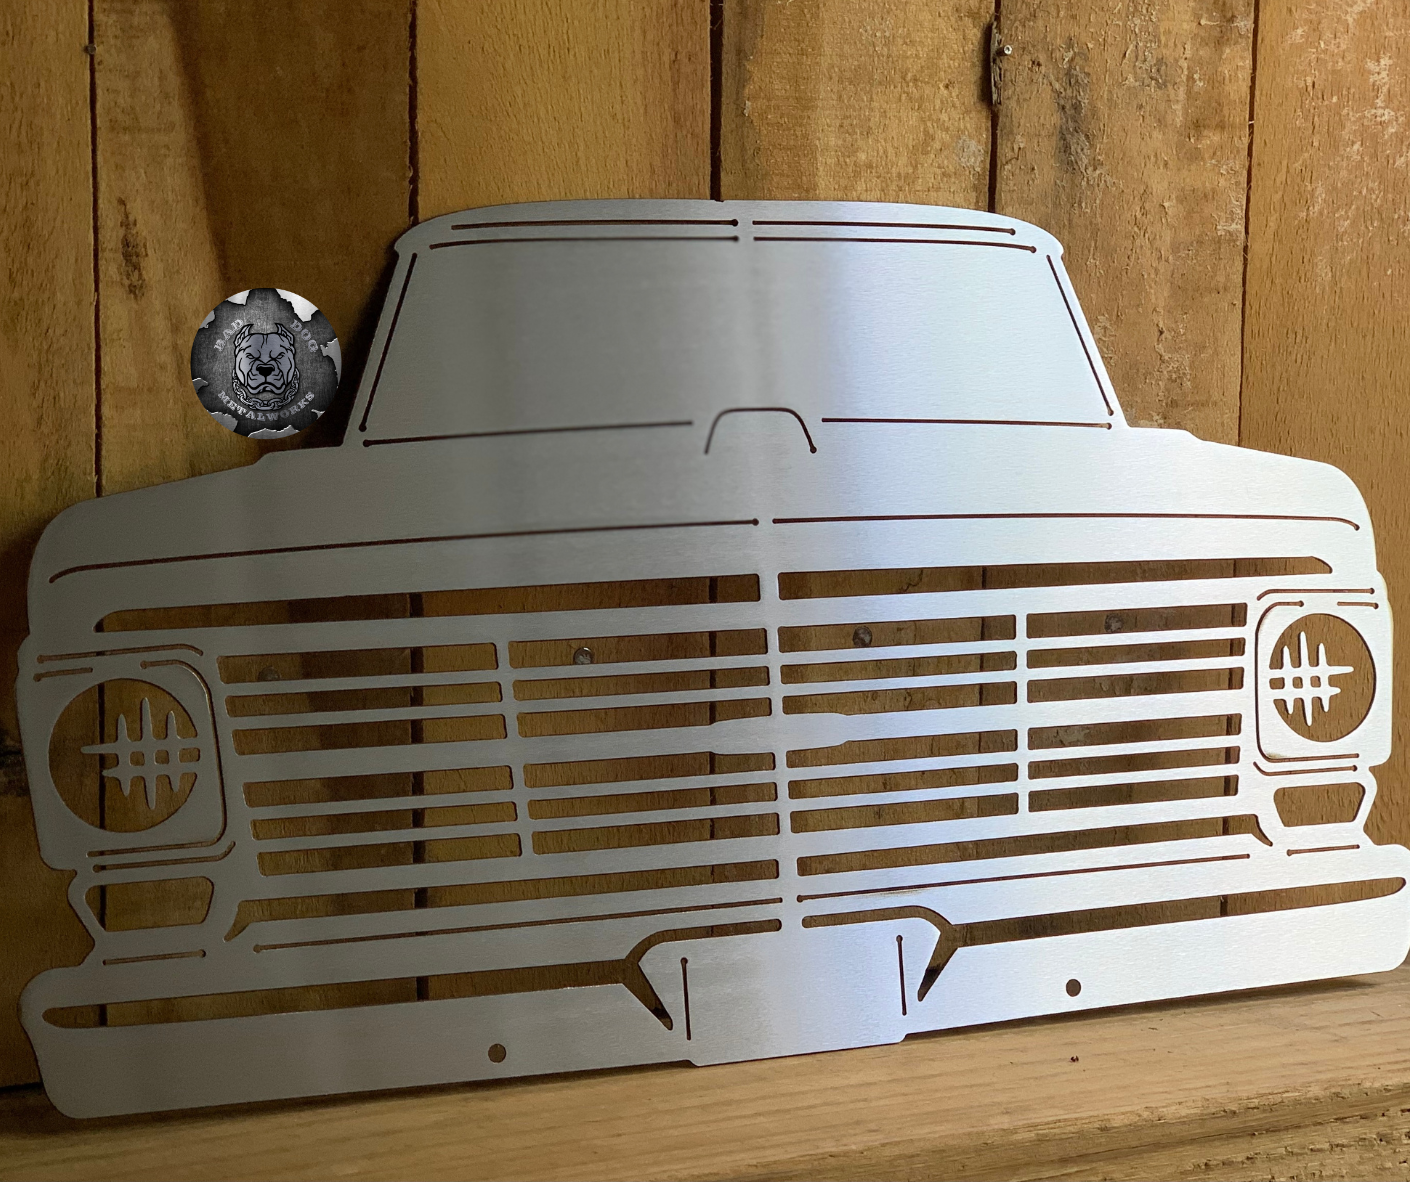 1969 Ford Pickup Truck Front End Metal Art